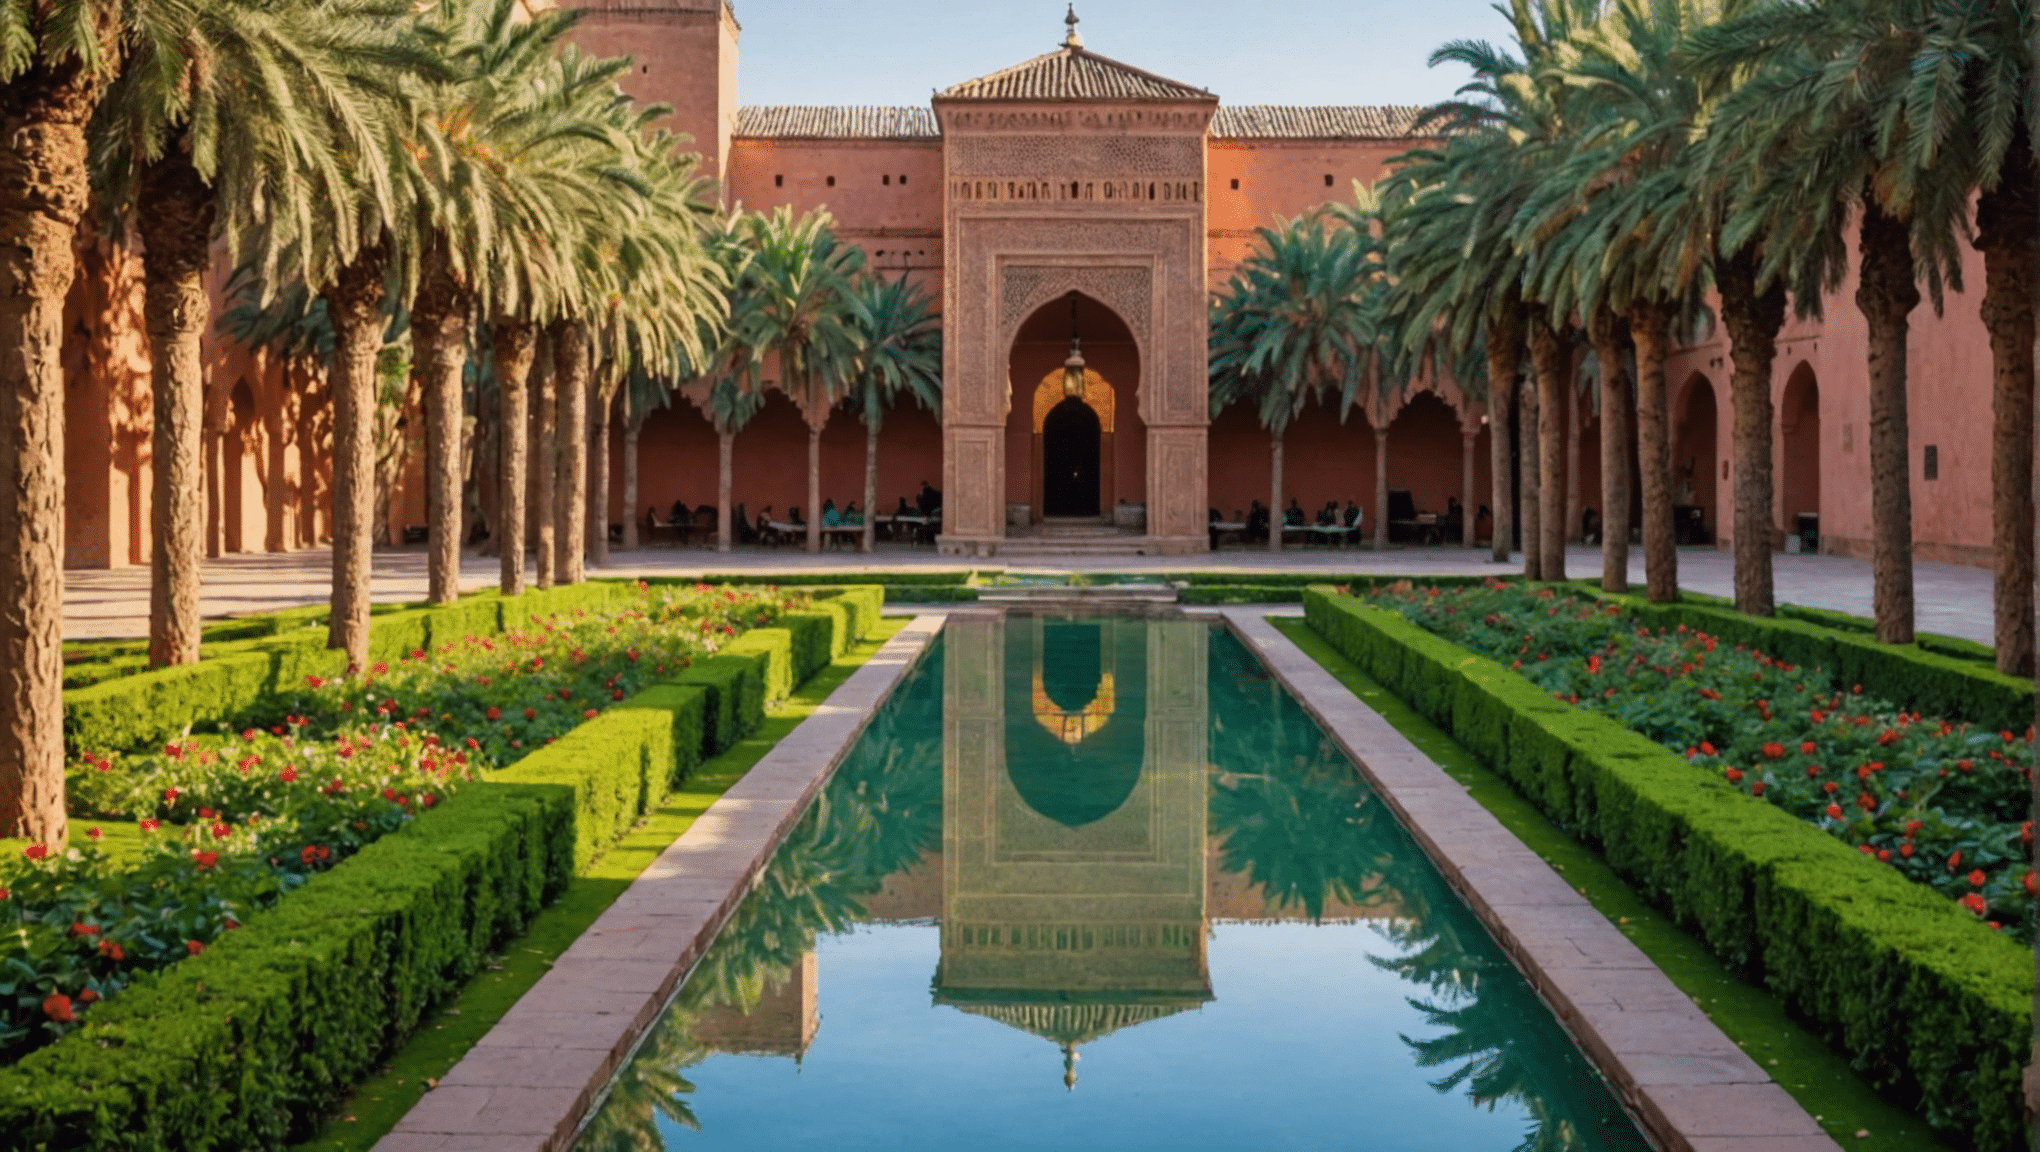 discover what makes menara gardens in marrakech so special! explore the historical significance, tranquility, and breathtaking landscapes of this iconic moroccan gem.